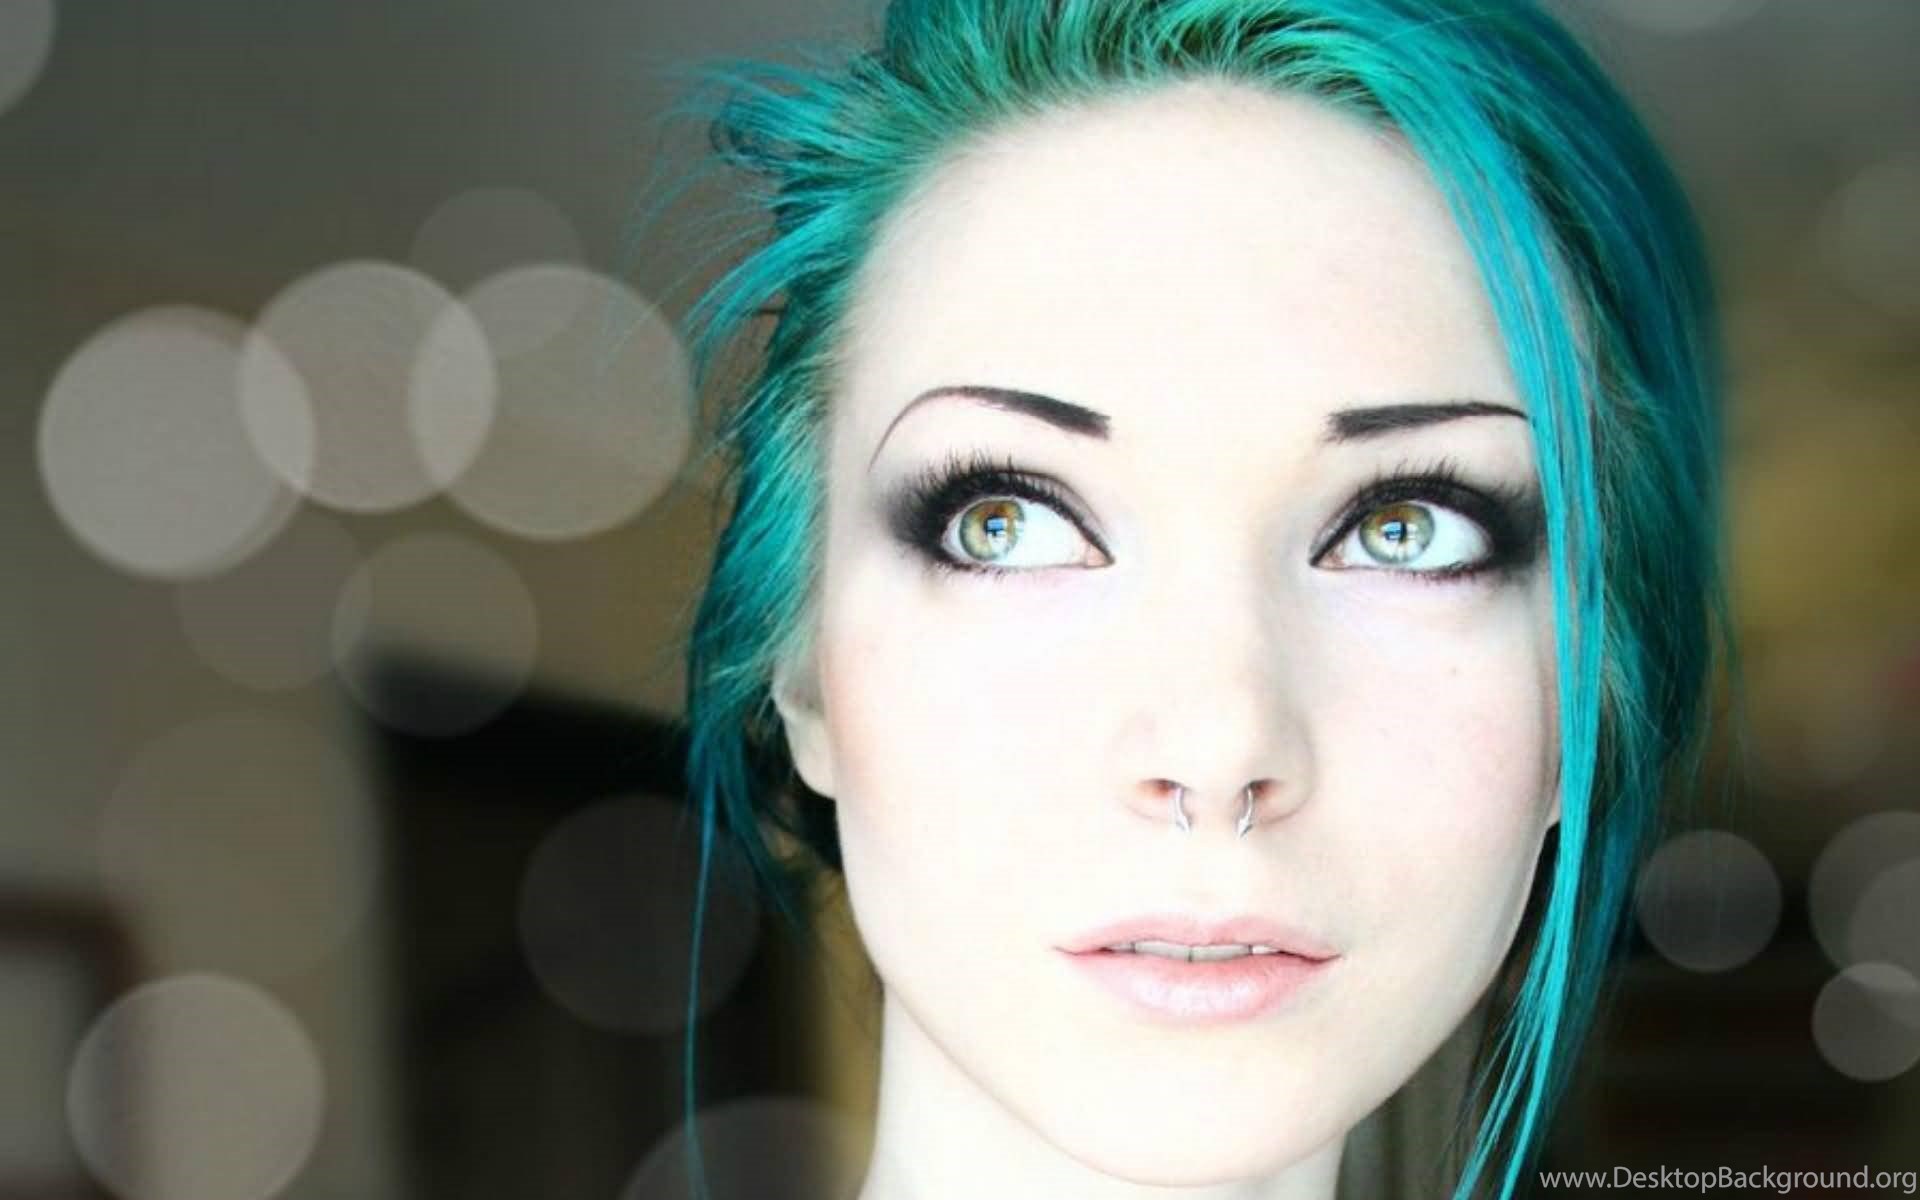 4. "The Emo Girl" - Blue hair is a popular hair color in the emo subculture - wide 3